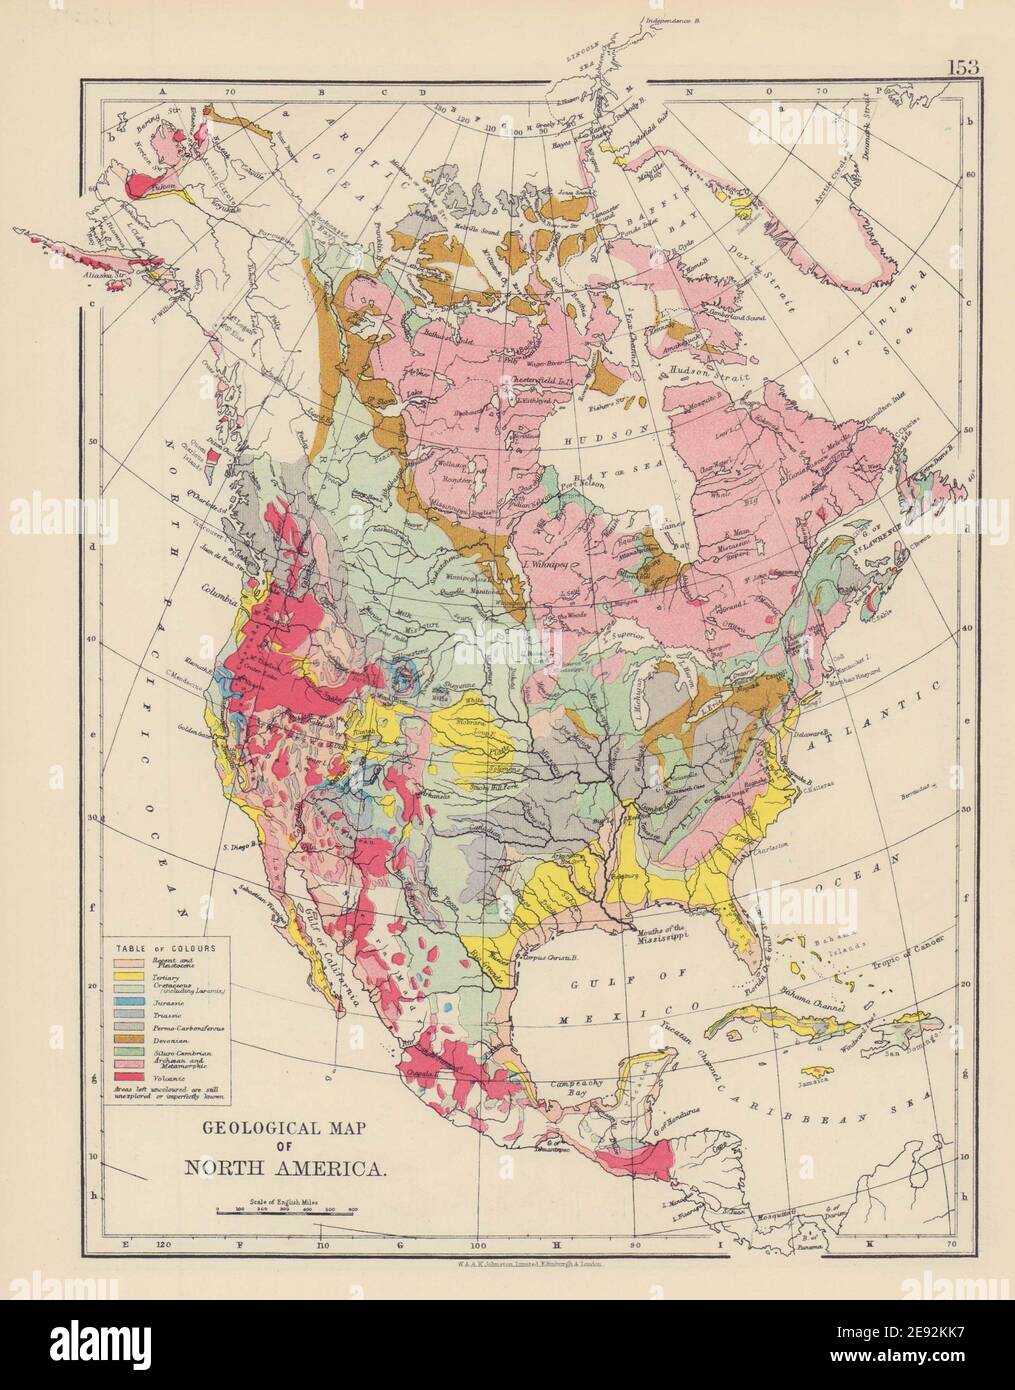 NORTH AMERICA GEOLOGICAL Volcanic Tertiary Jurassic Cretaceous JOHNSTON 1901 map Stock Photo